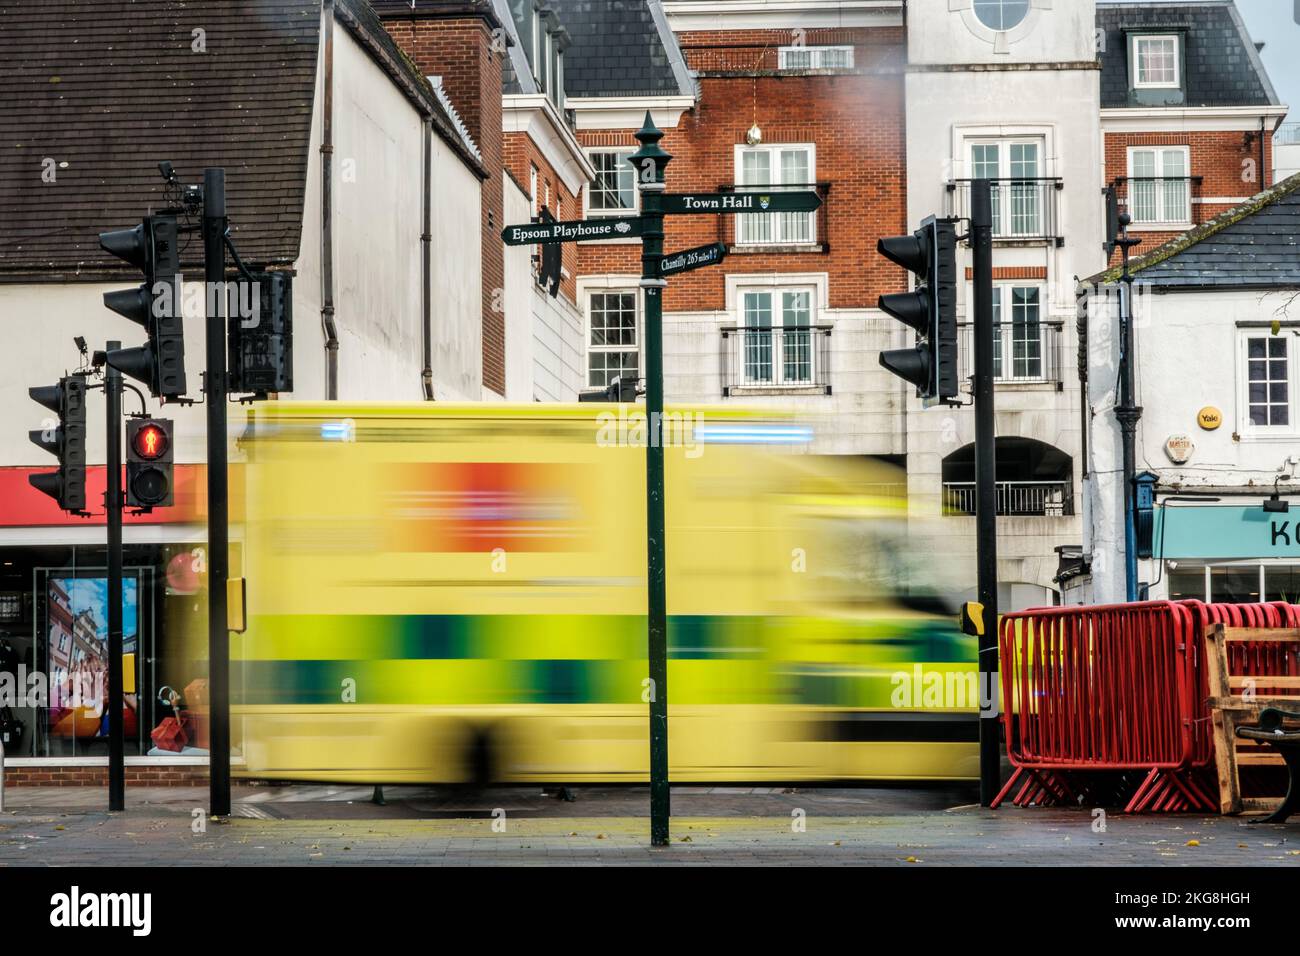 Epsom, Surrey, London UK, November 20 2022, Ambulance Passing Traffic Lights On A High Street With Blurred Effect To Indicate Speed And Motion Stock Photo